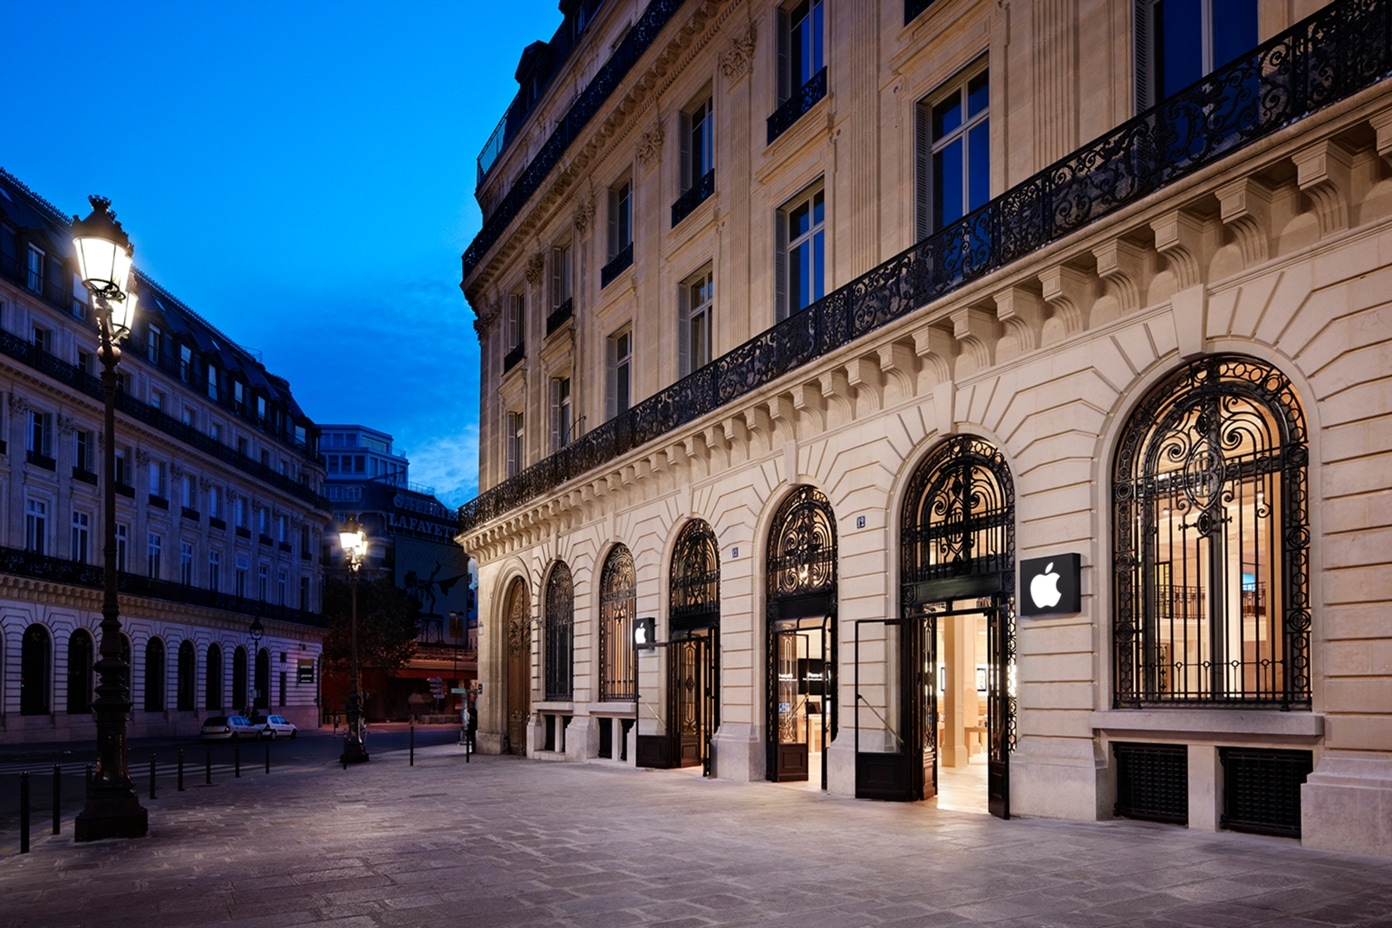 Apple sues French activist group that occupied one of its stores against alleged tax evasion [atualizado: negado]